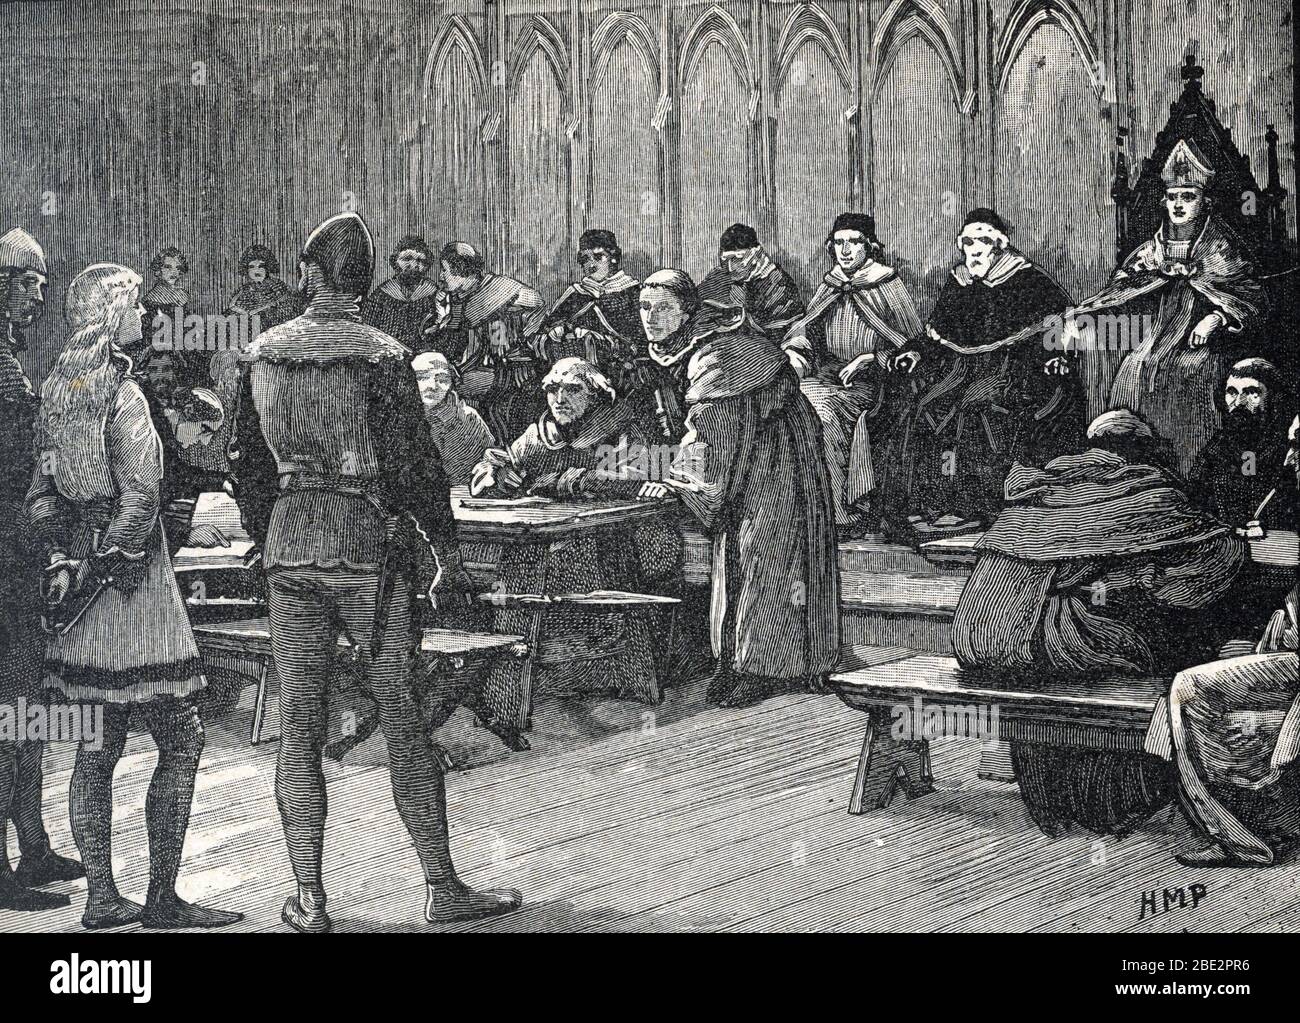 Trial of Joan of Arc, 1431 : Cardinal Henry Beaufort, Bishop of Winchester, interrogates Joan of Arc (Le proces de Jeanne d'Arc, 1431) Engraving from Stock Photo